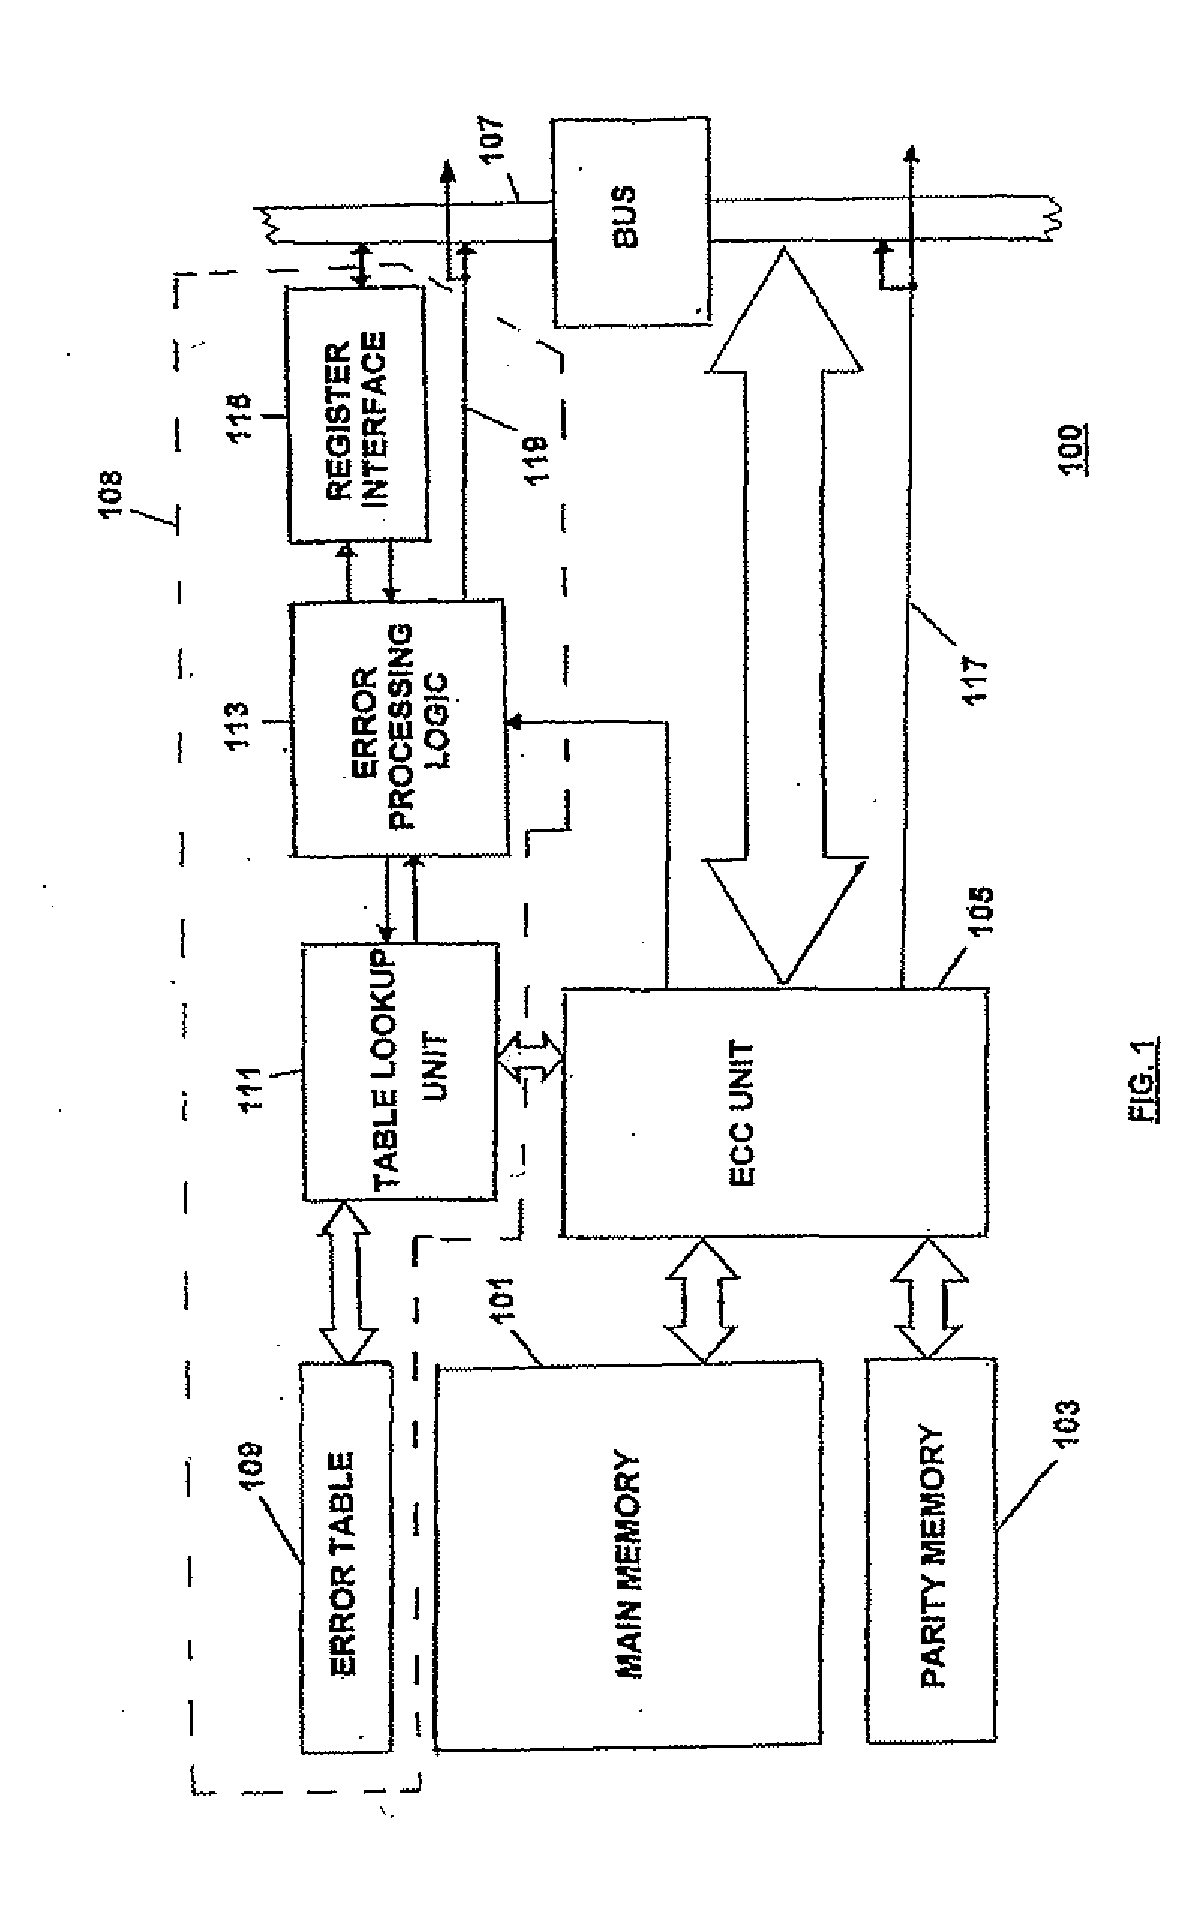 Memory system with ecc-unit and further processing arrangement